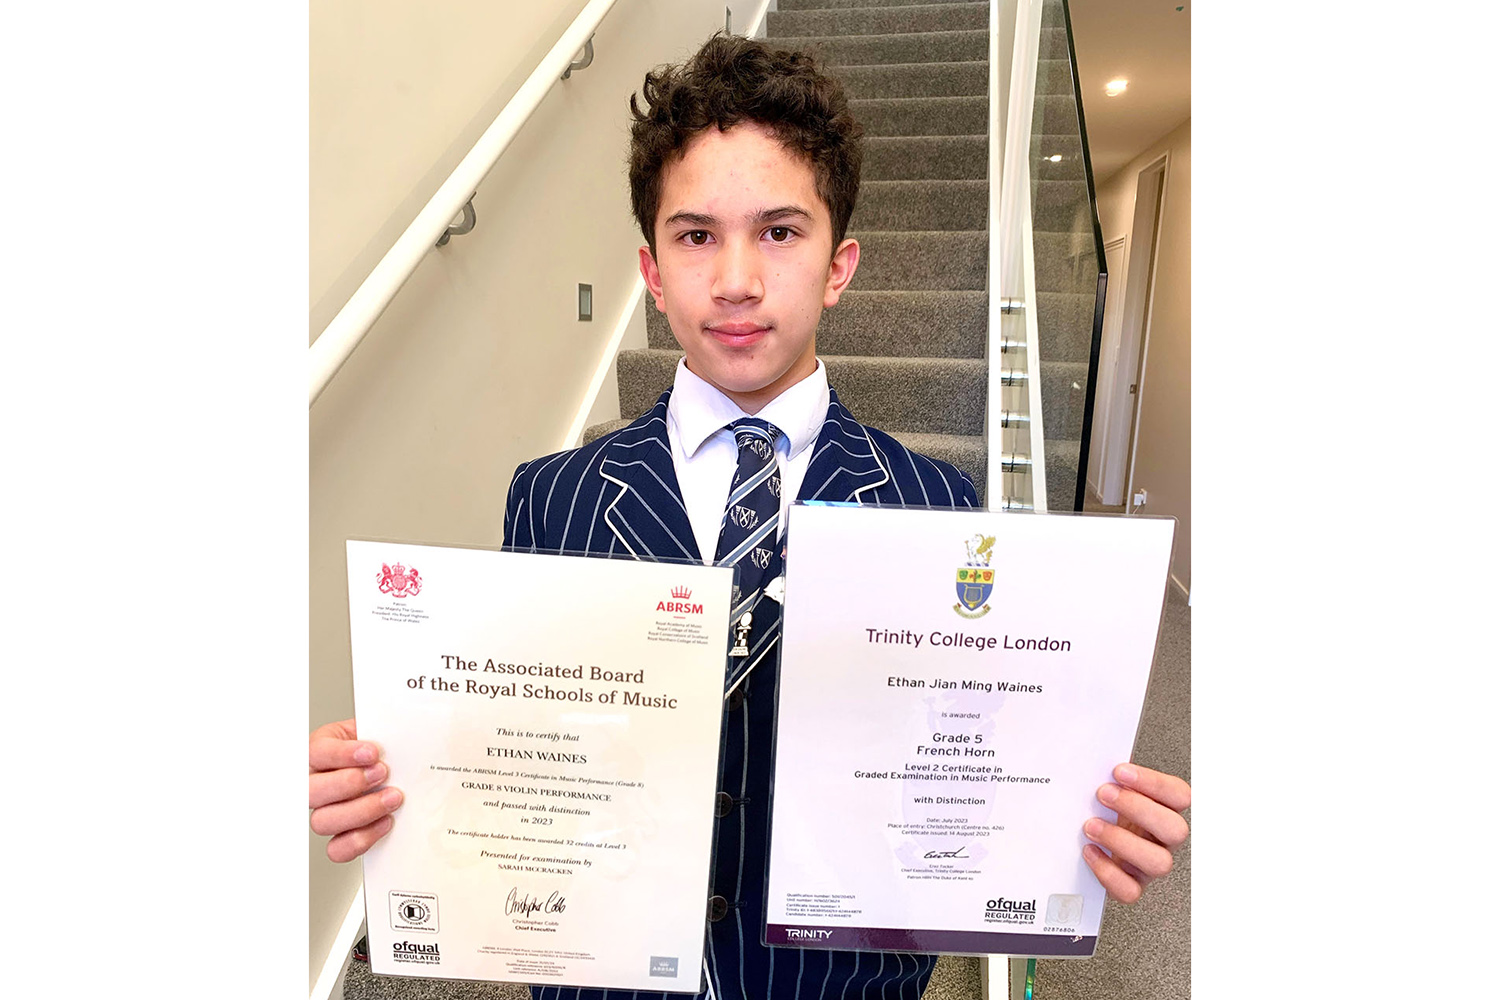 St Andrew's College student Ethan Waines passed his violin and French horn examinations with High Distinction.